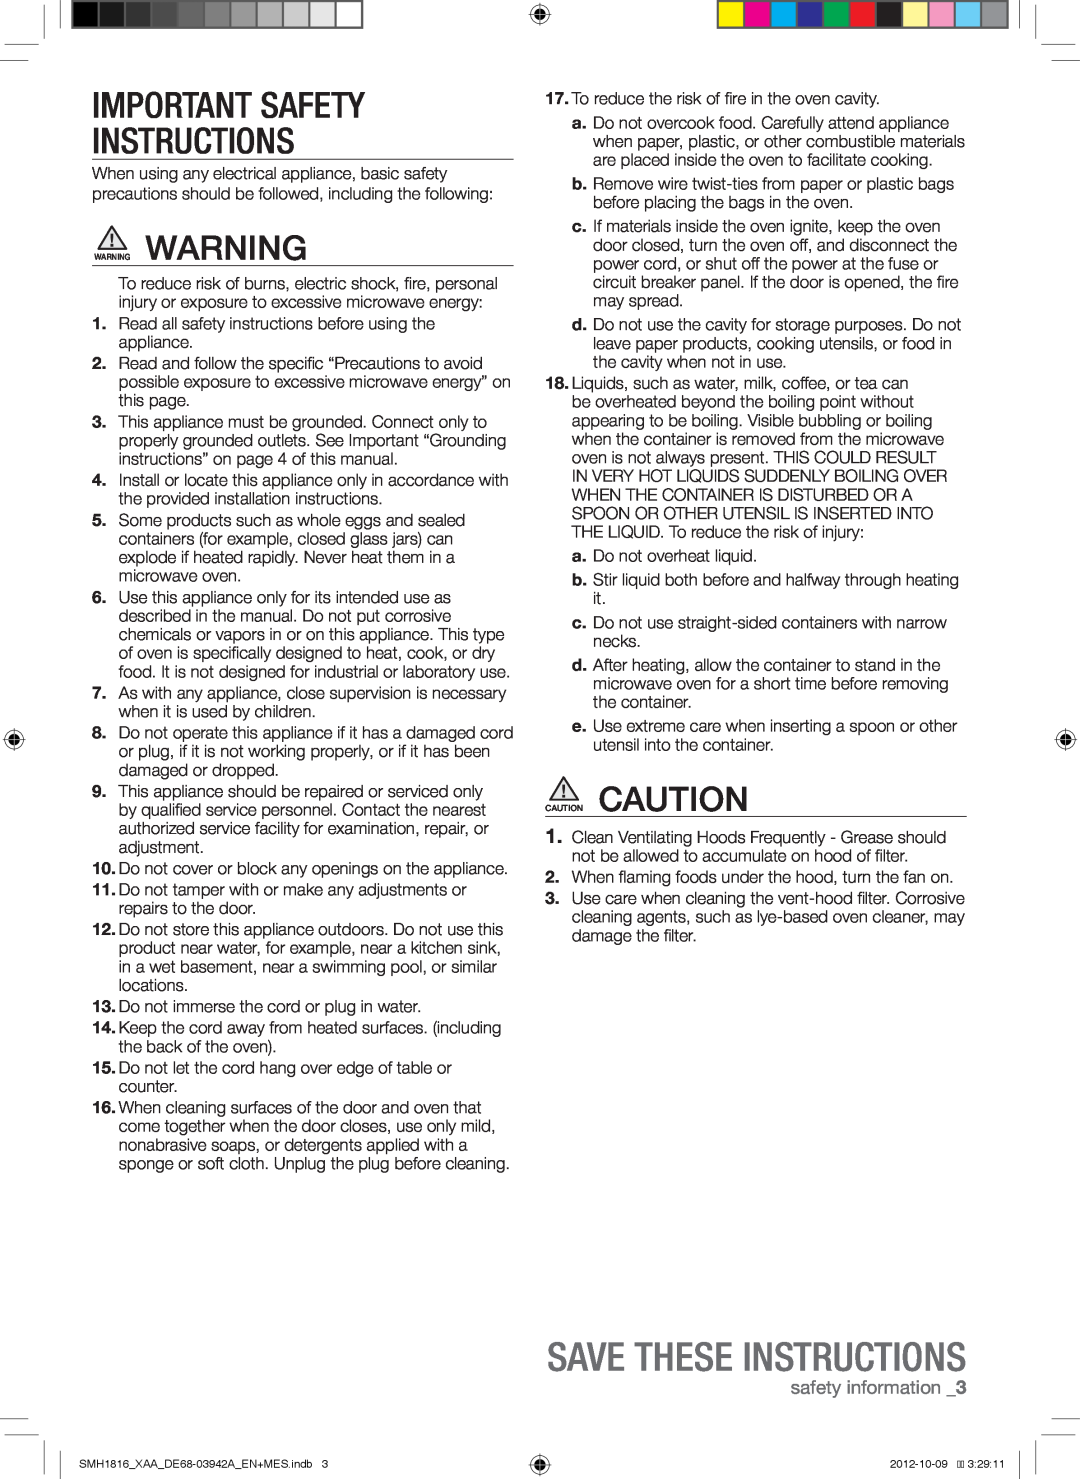 Samsung SMH1816B, SMH1816S, SMH1816W Save These Instructions, Important Safety Instructions, safety information 